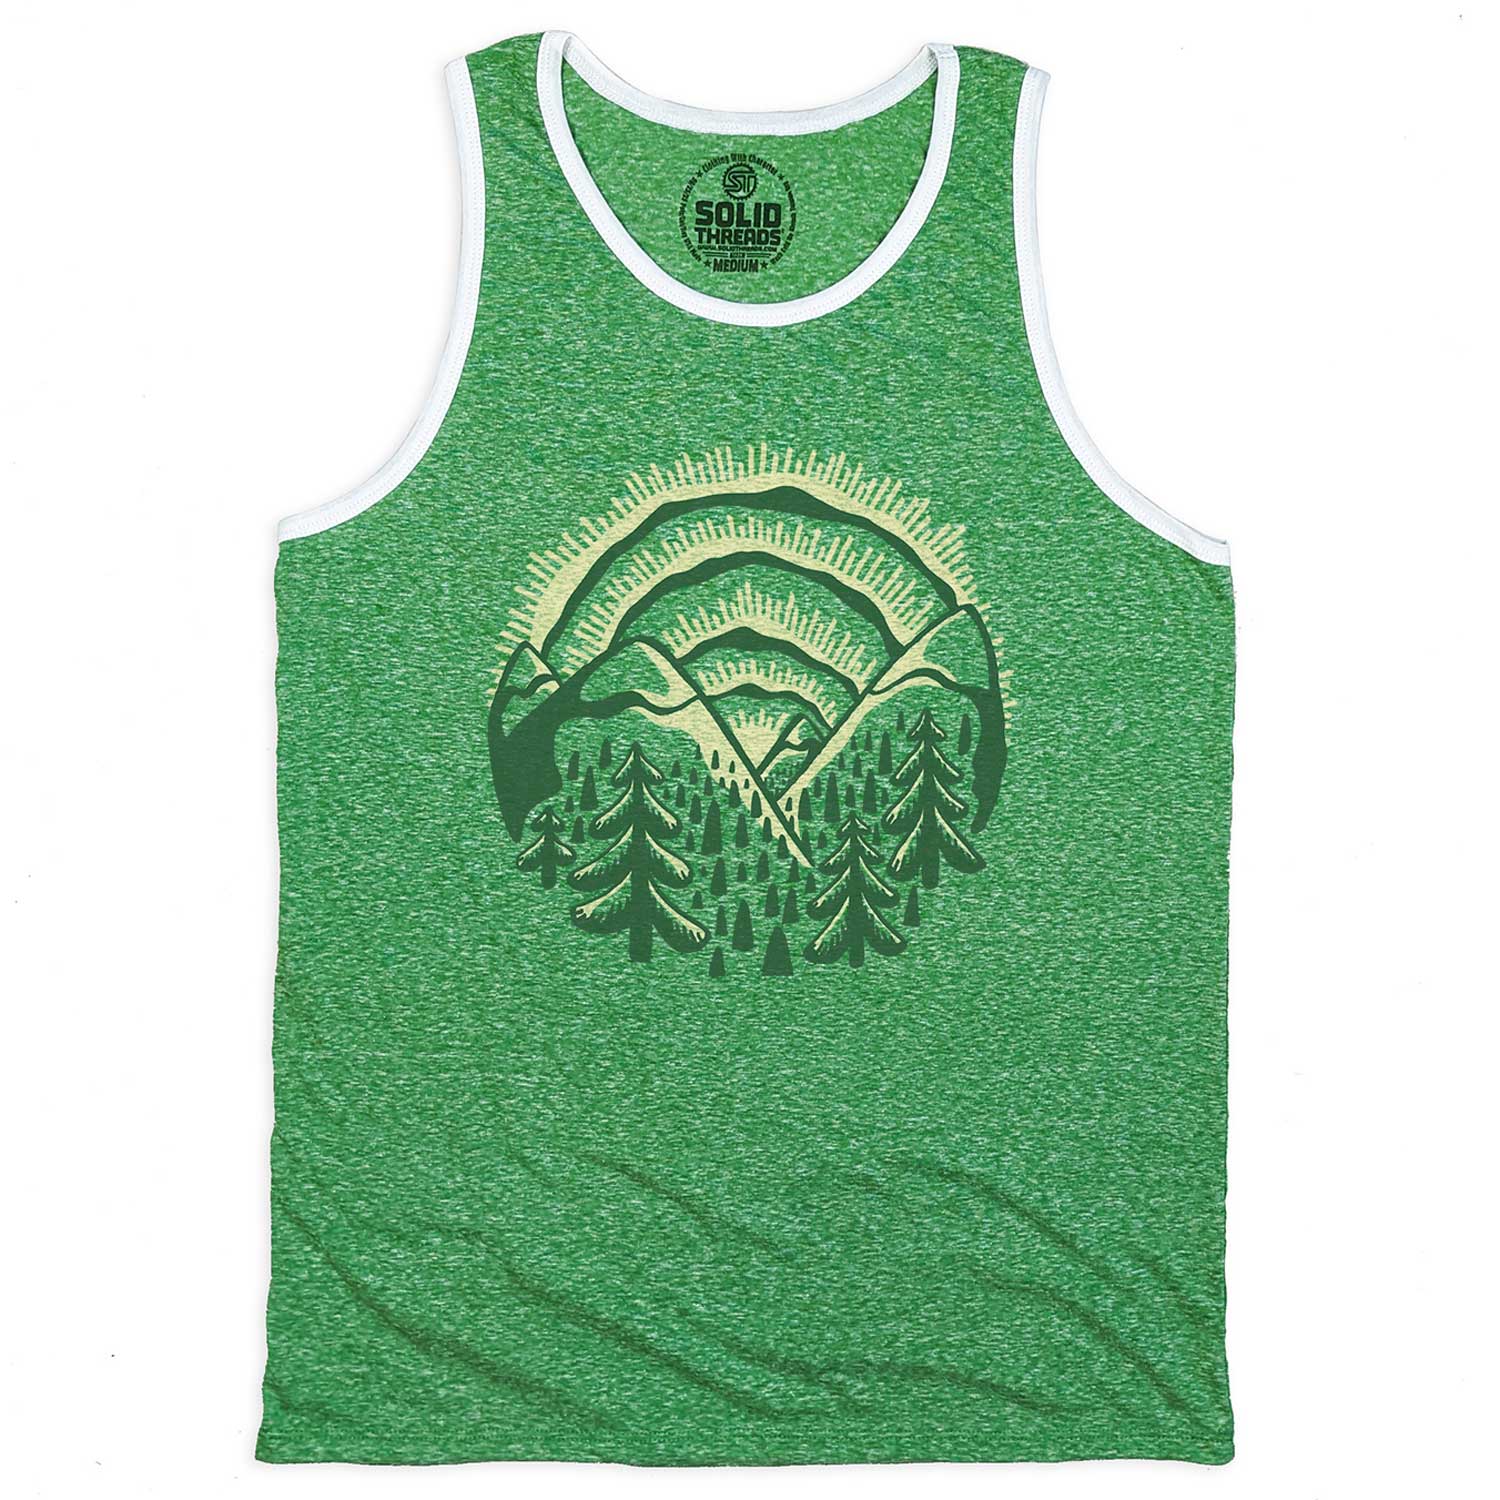 Men's Sunset Vintage Graphic Tank Top | Retro Nature T-shirt | Solid Threads